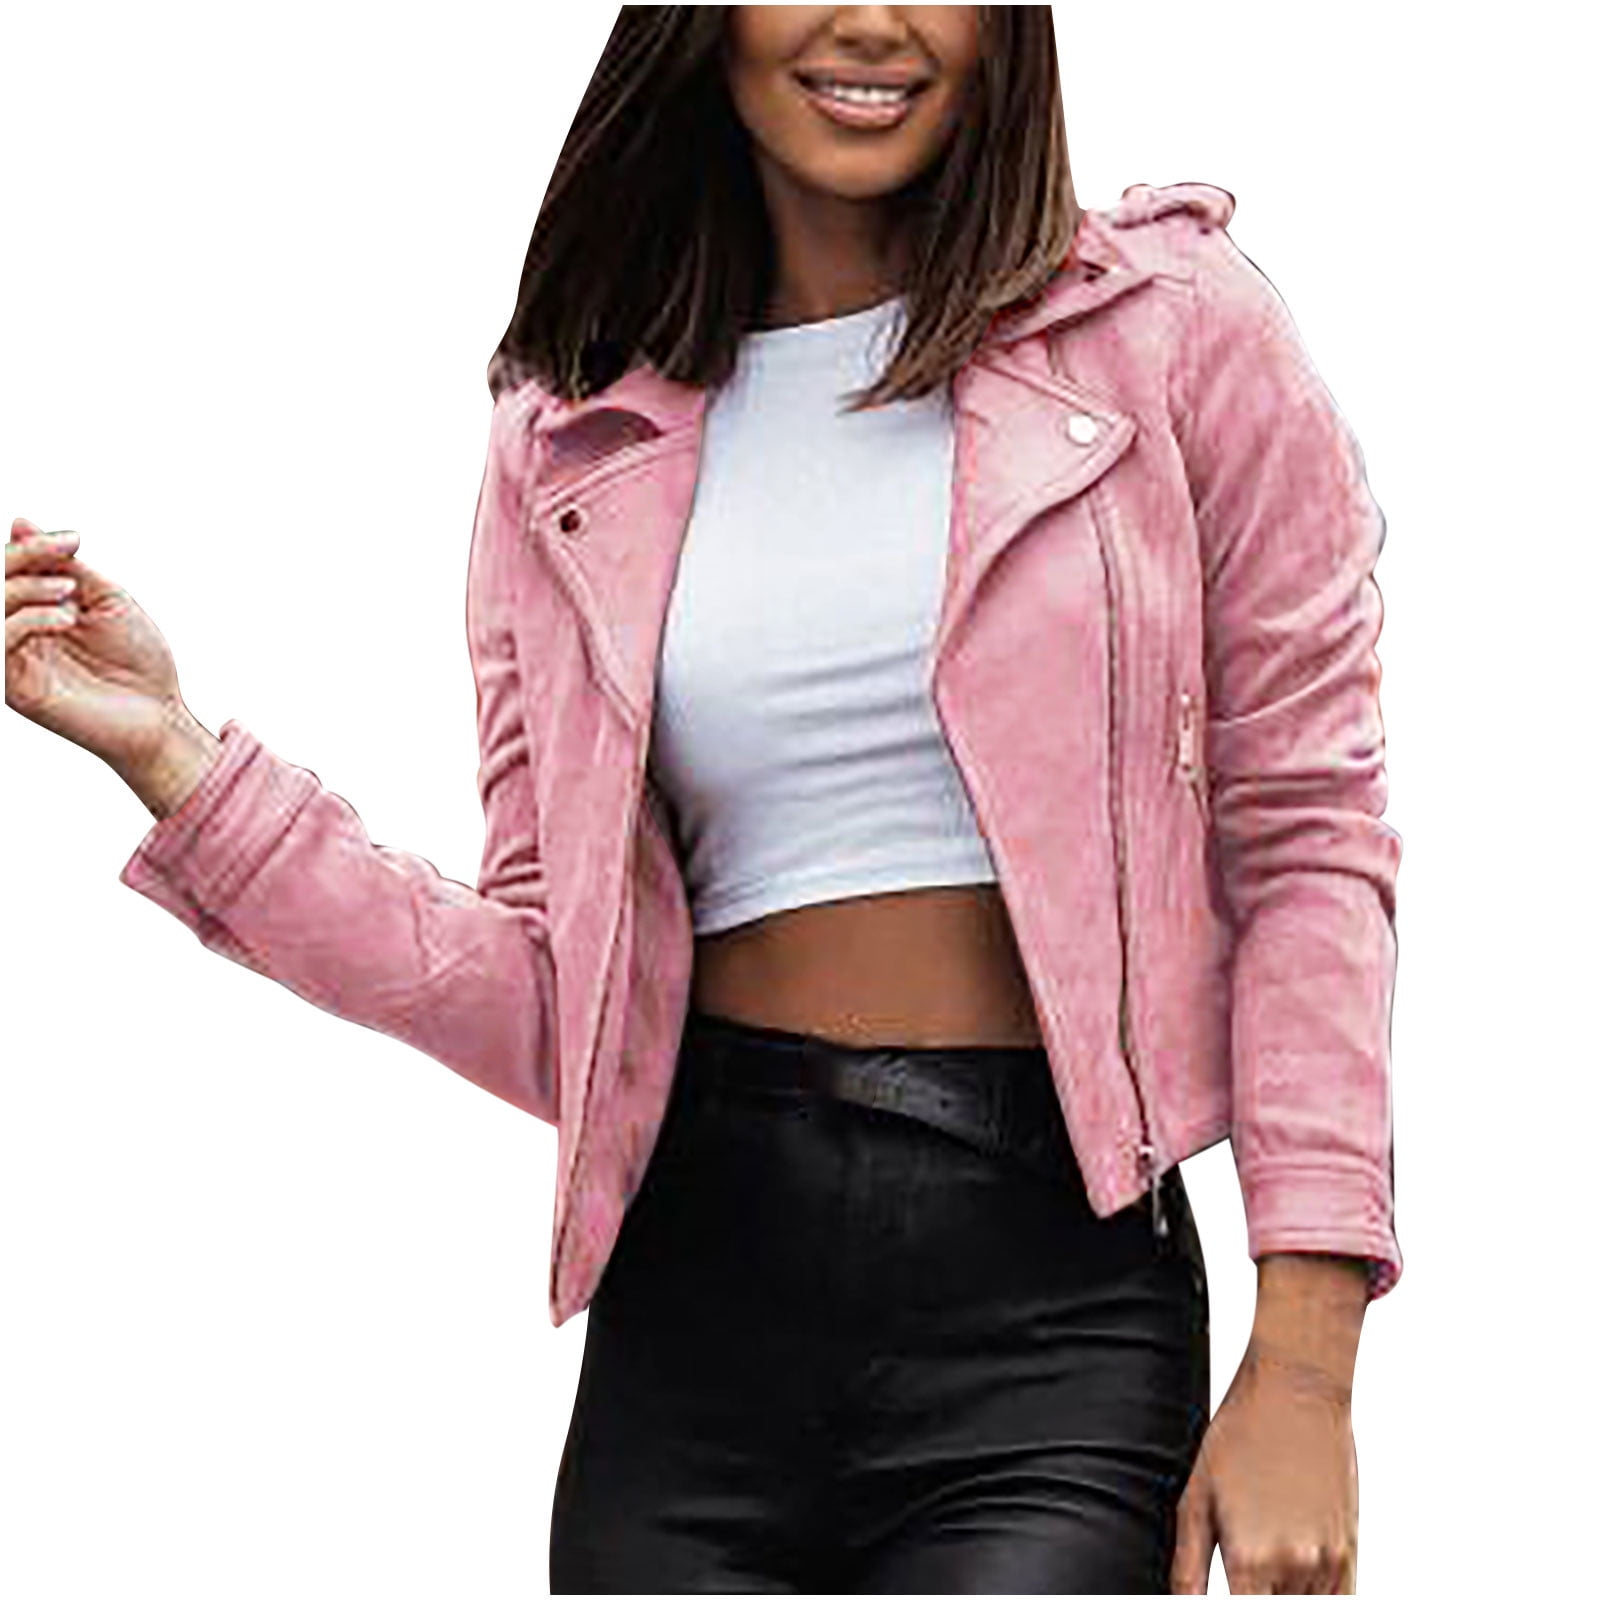 XFLWAM Womens Leather 2022 Faux Zip Up Classical Jackets Long Plus Size Cropped Motorcycle Outwear Coat Pink - Walmart.com